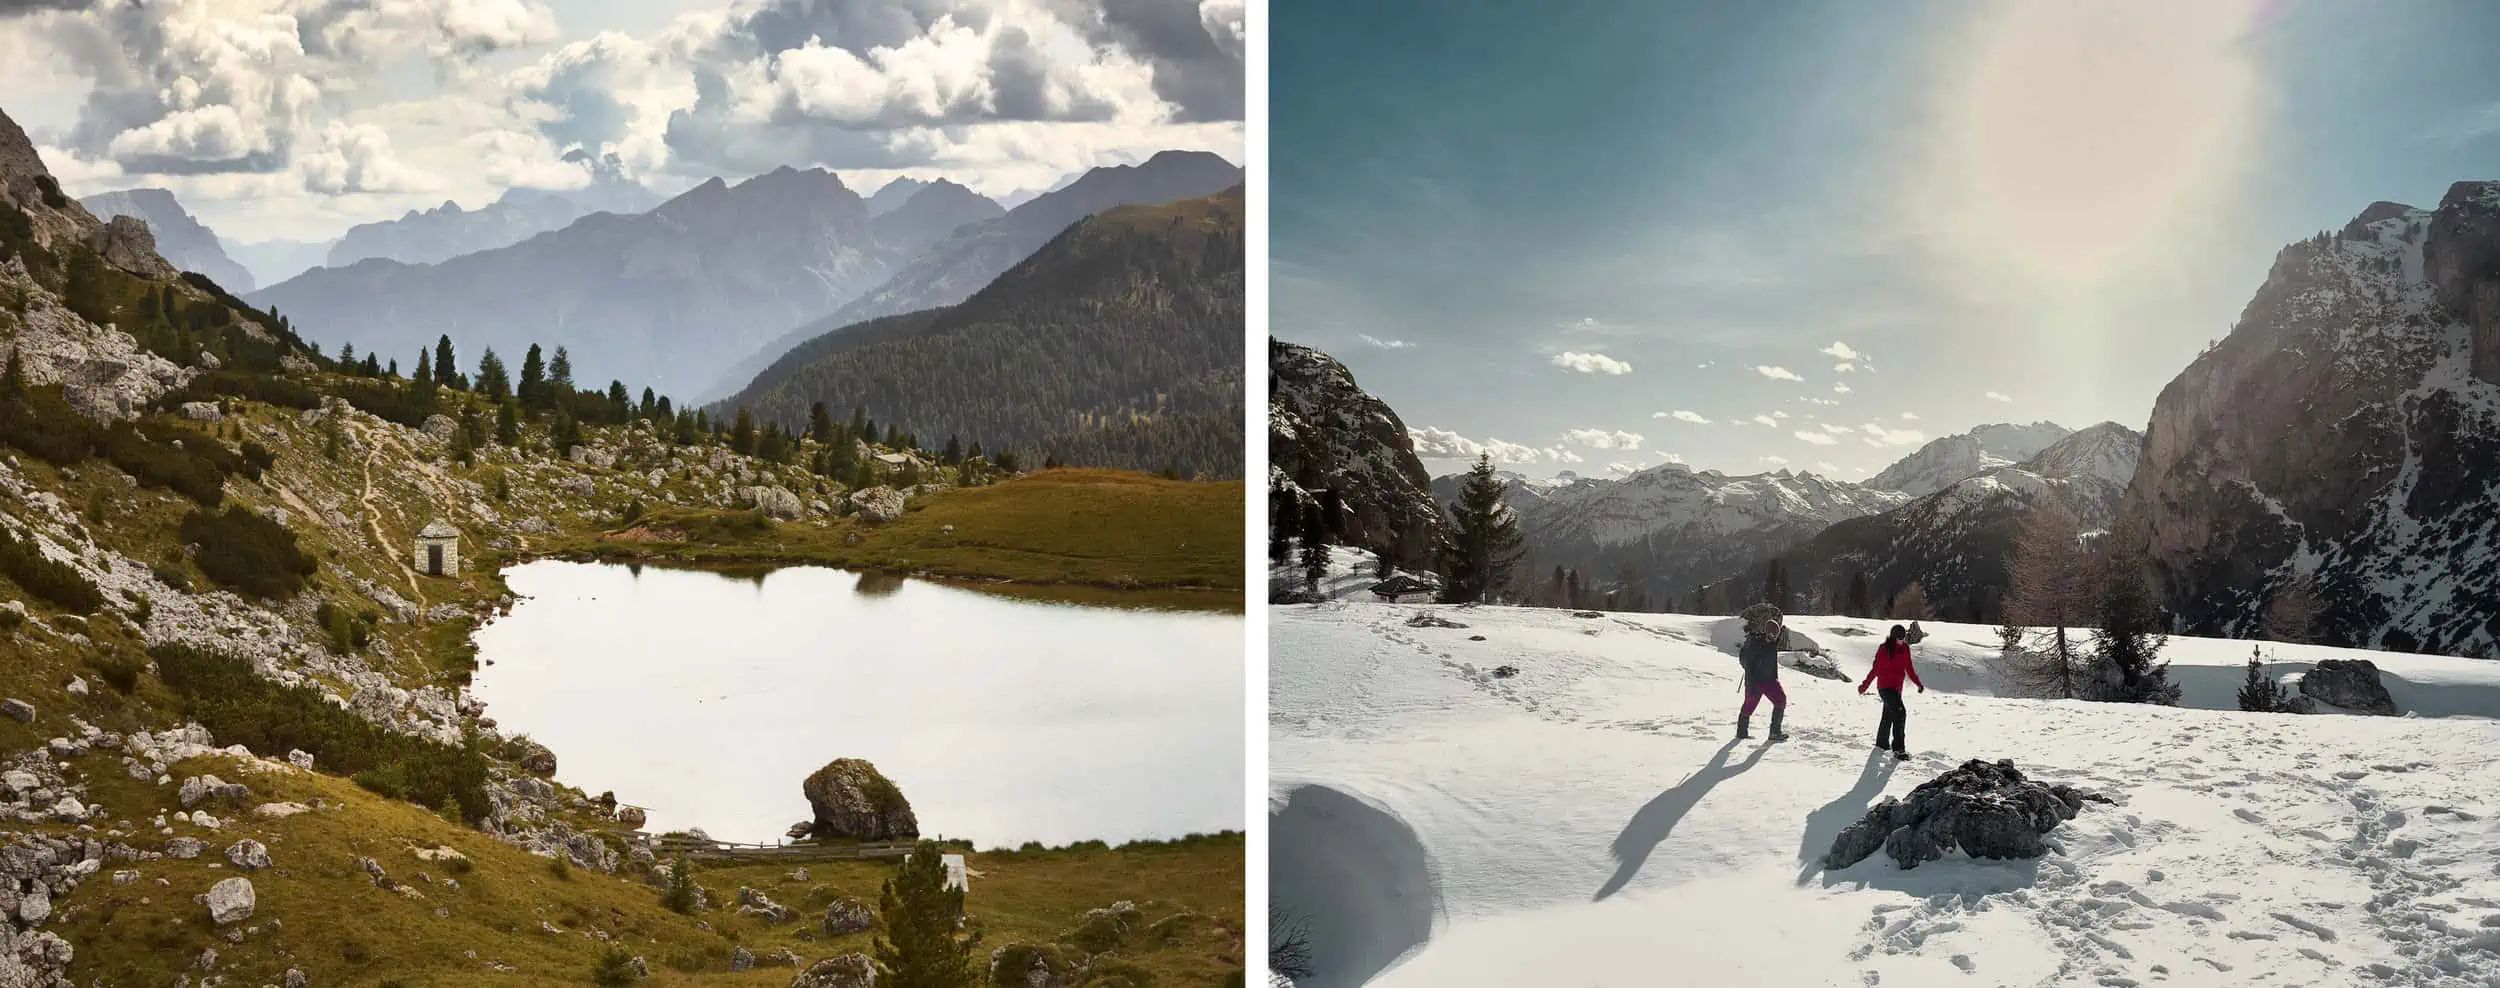 Lago di Val Parola in summer and the more challenging (but fun) winter hiking in the area